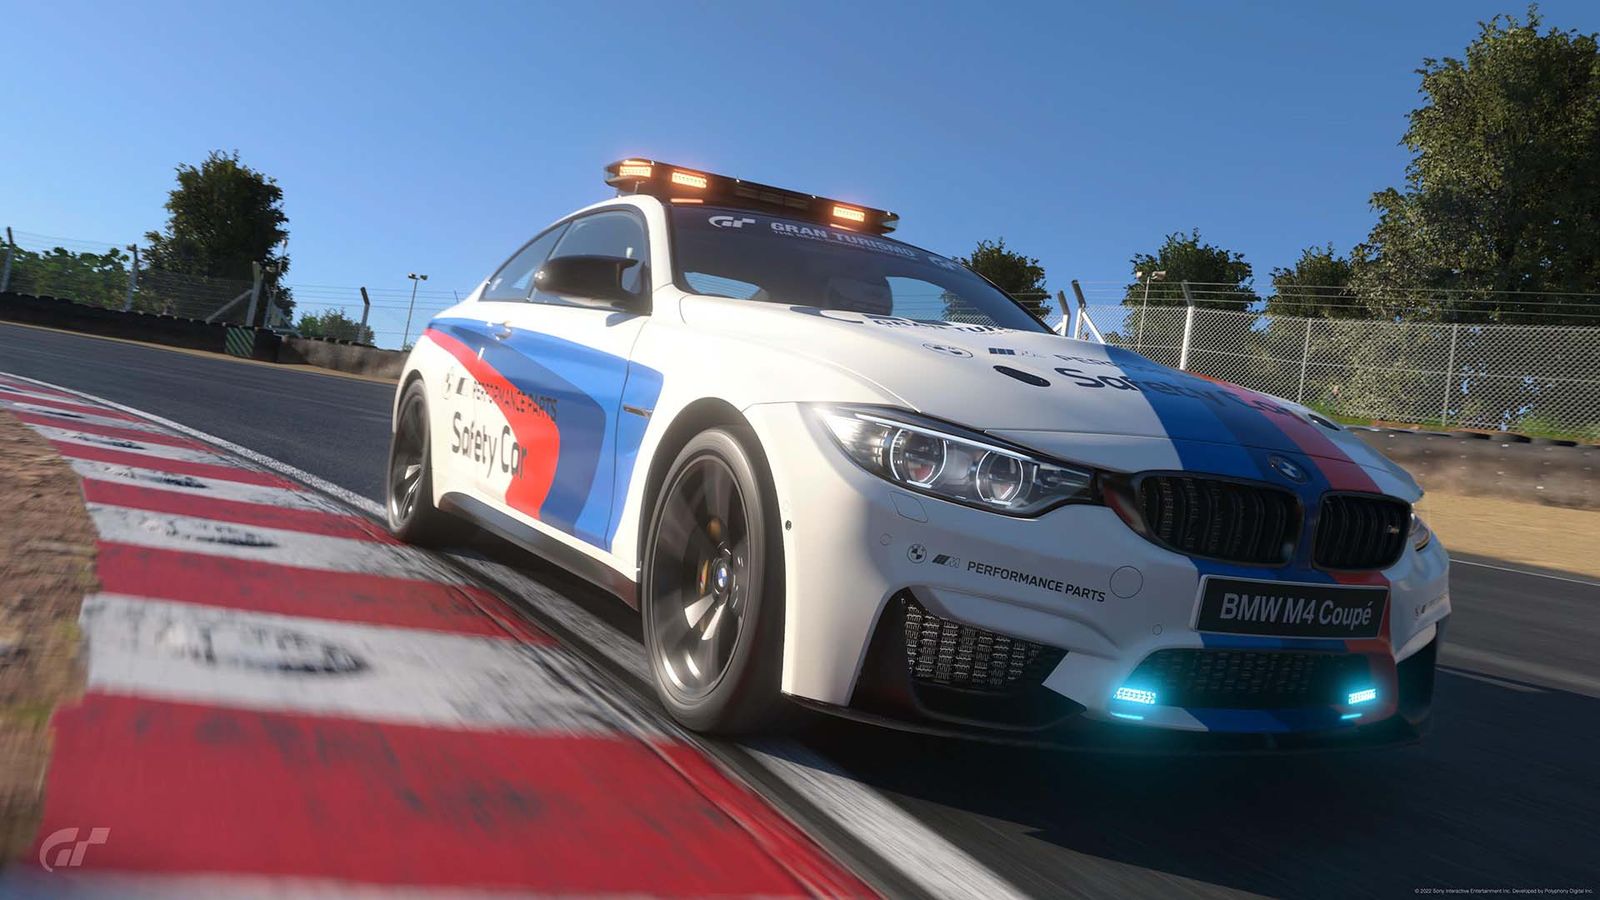 The BMW M4 Safety Car in Gran Turismo 7.